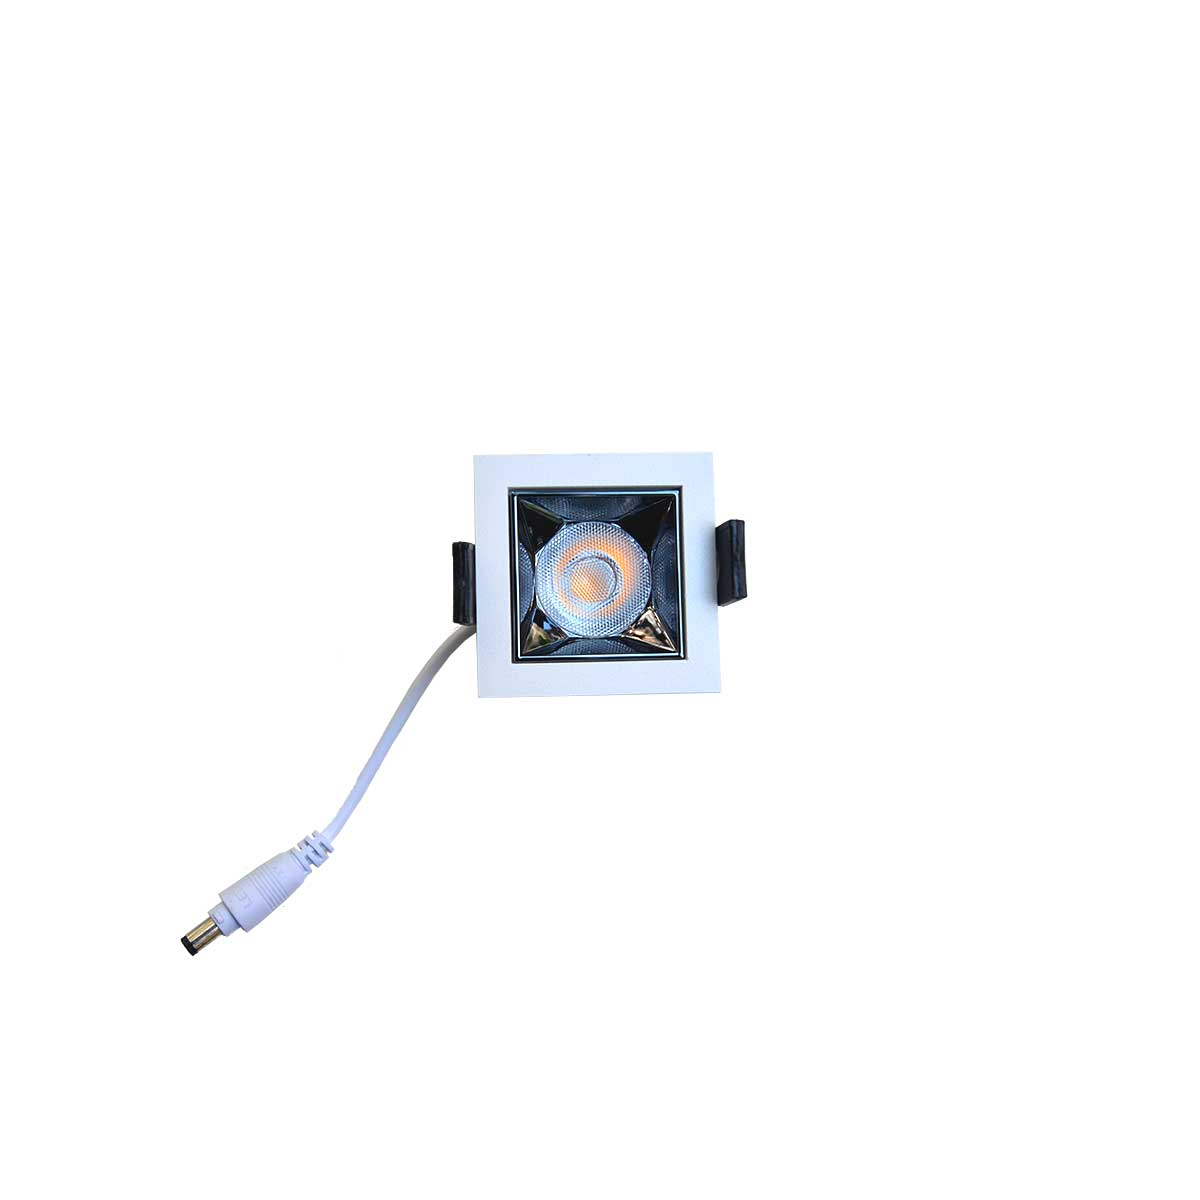 Indoor Direct Spotlight MH-L1103-5W SMD IP65 3000K- Warm White